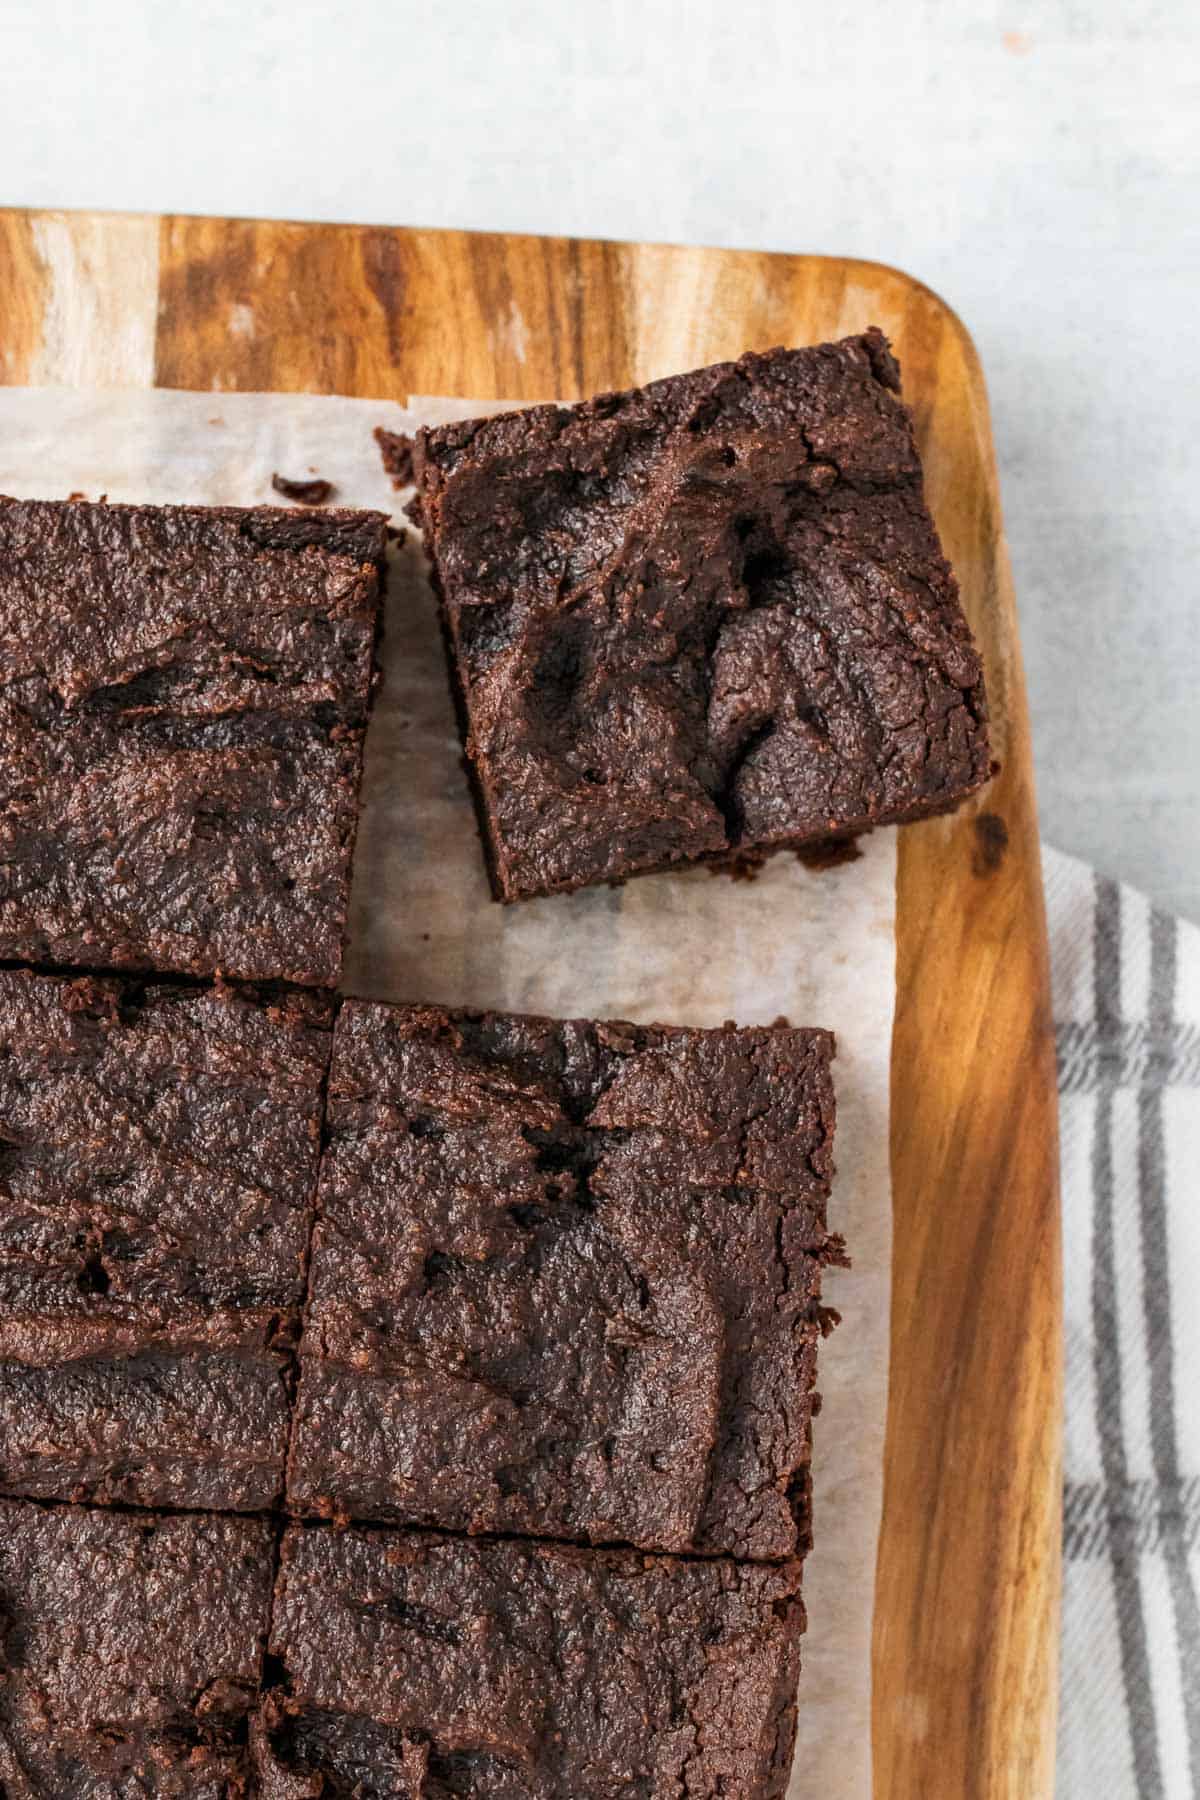 Closeup of sliced brownies on a wooden cutting board with one slice pulled slightly away from the rest